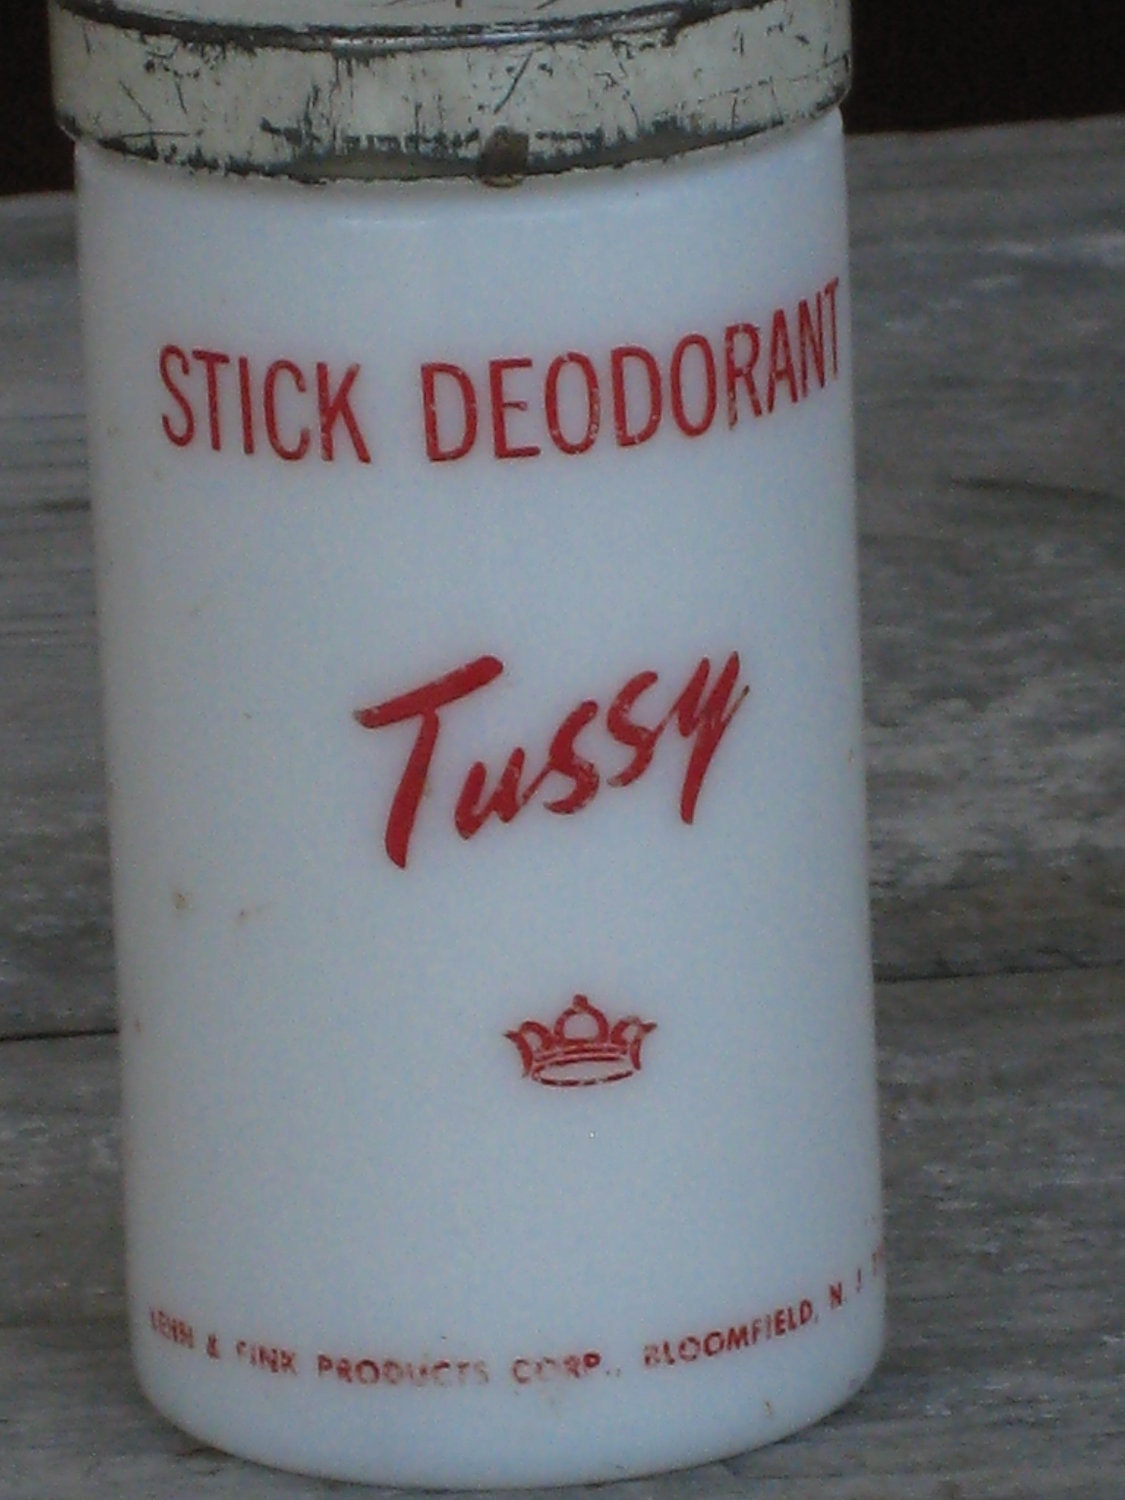 What is Tussy deodorant?